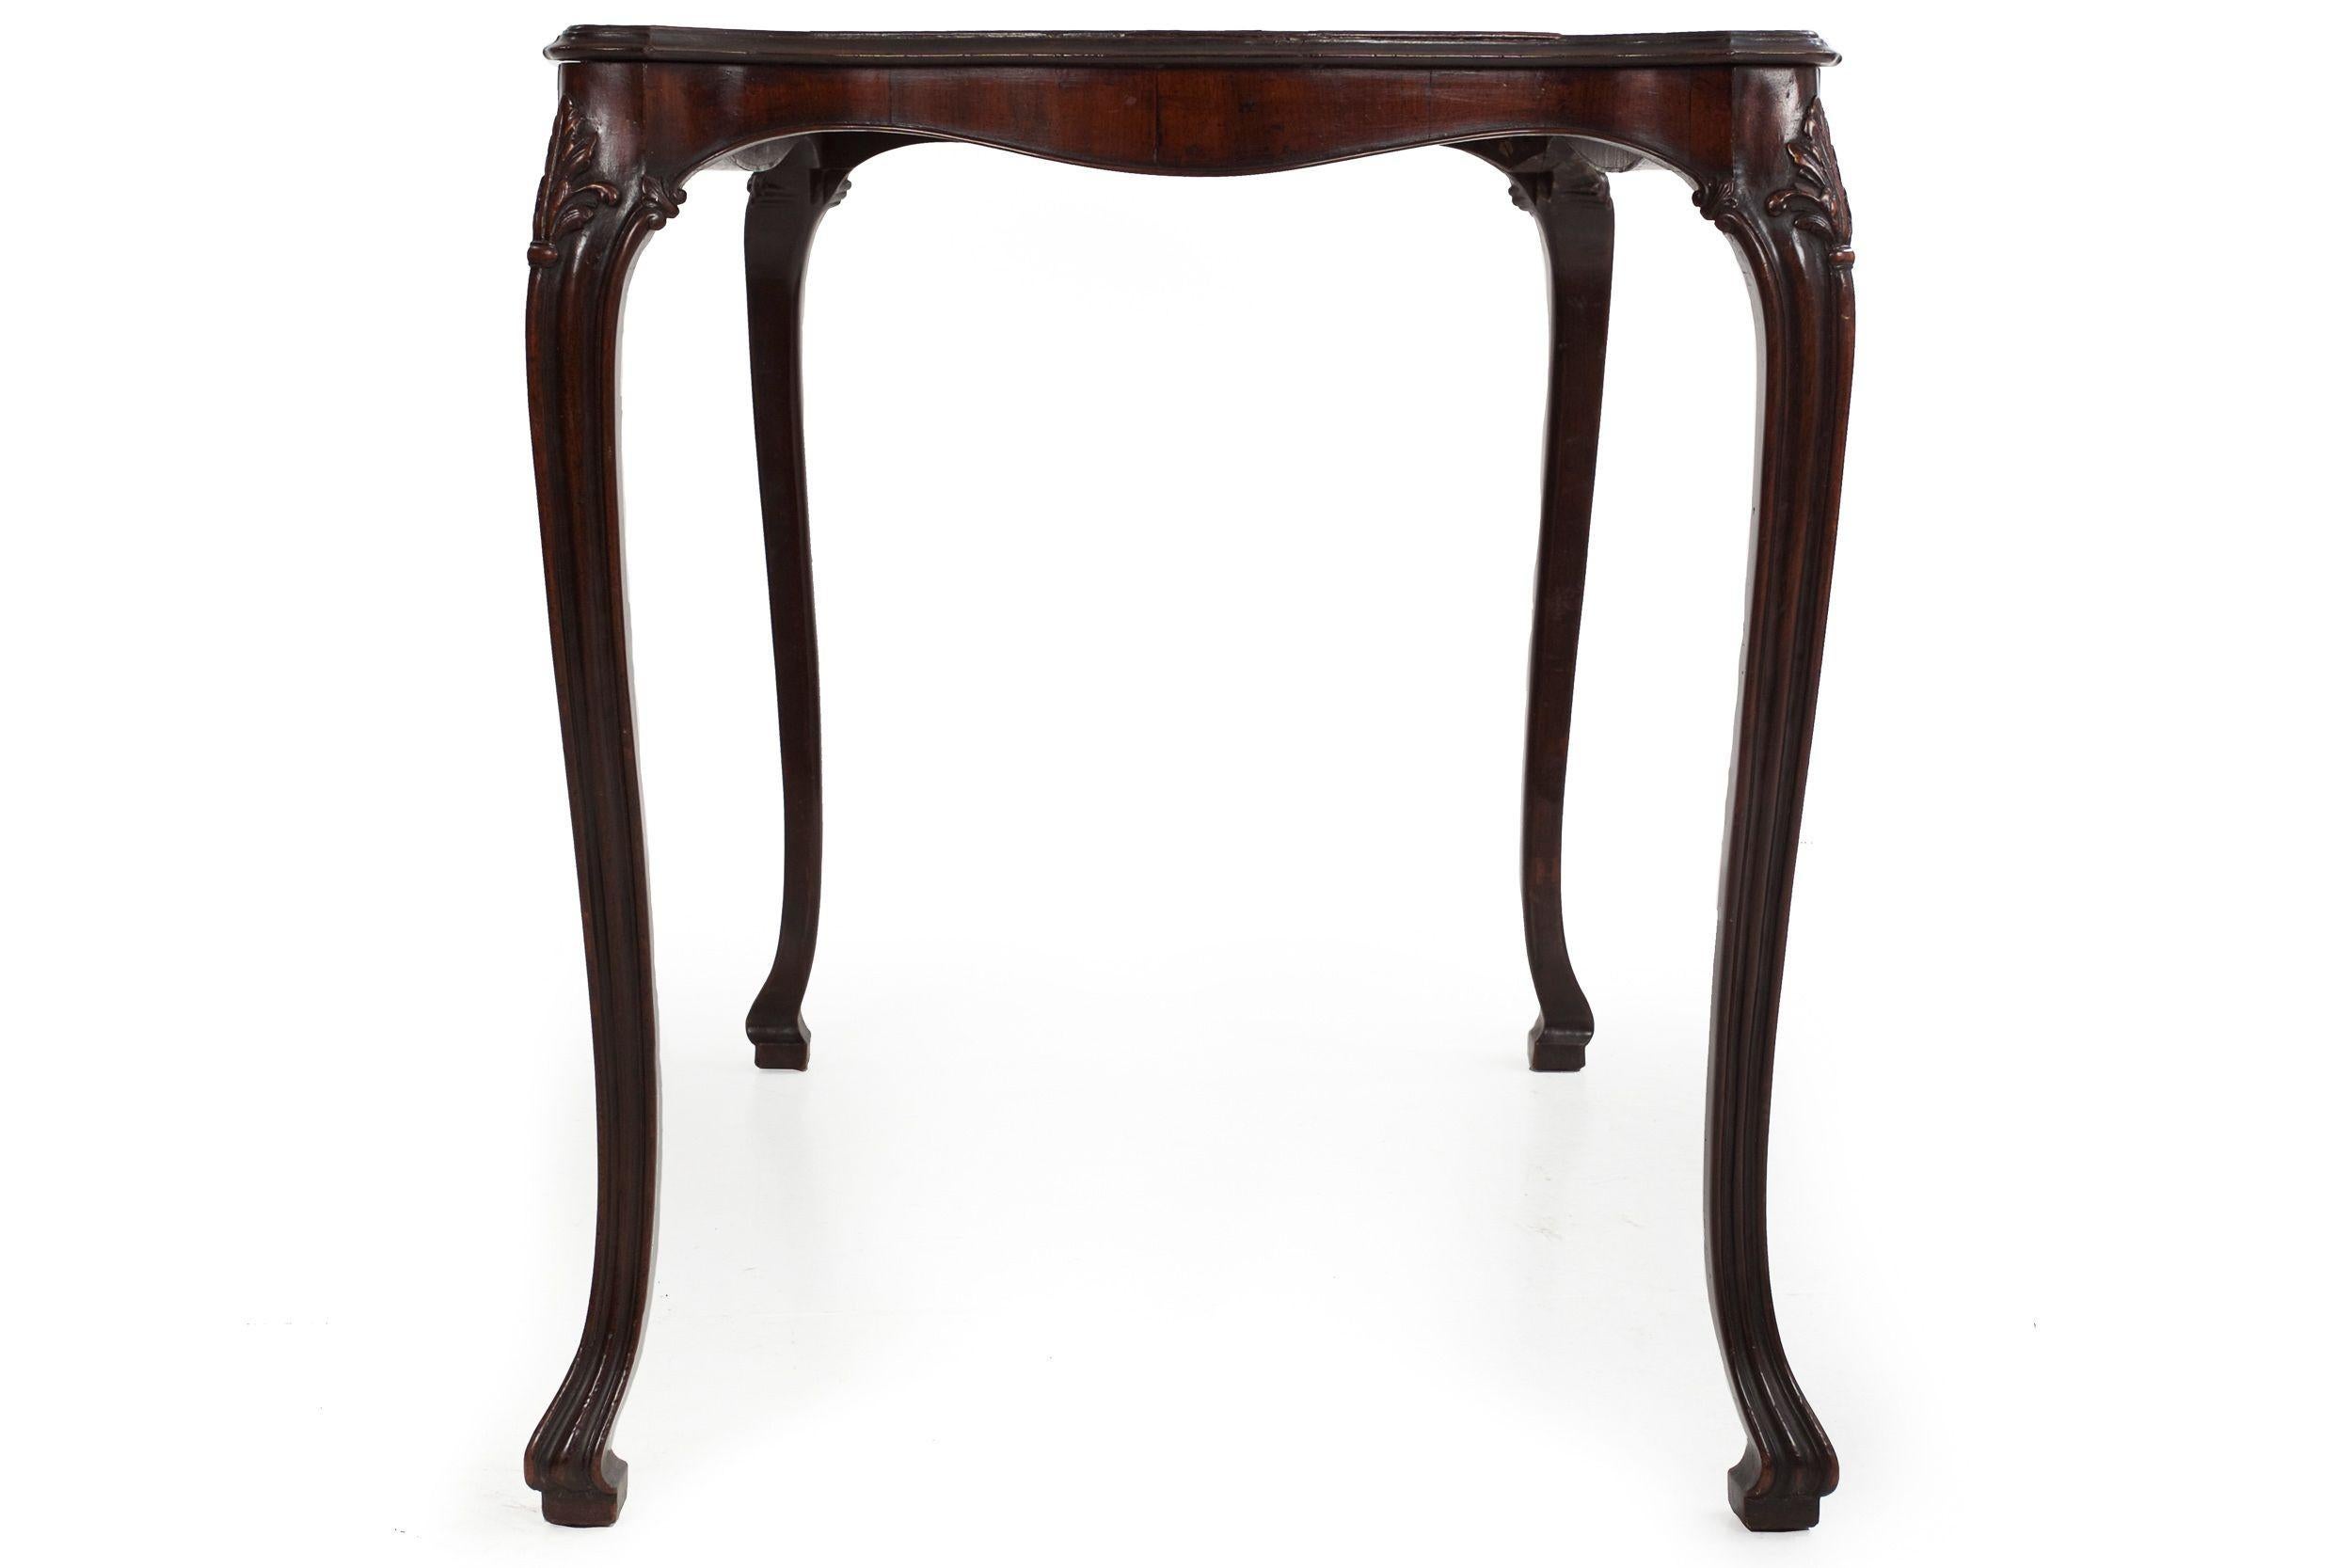 Rare English Chippendale Mahogany Serpentine Serving Table, circa 1770 In Good Condition For Sale In Shippensburg, PA